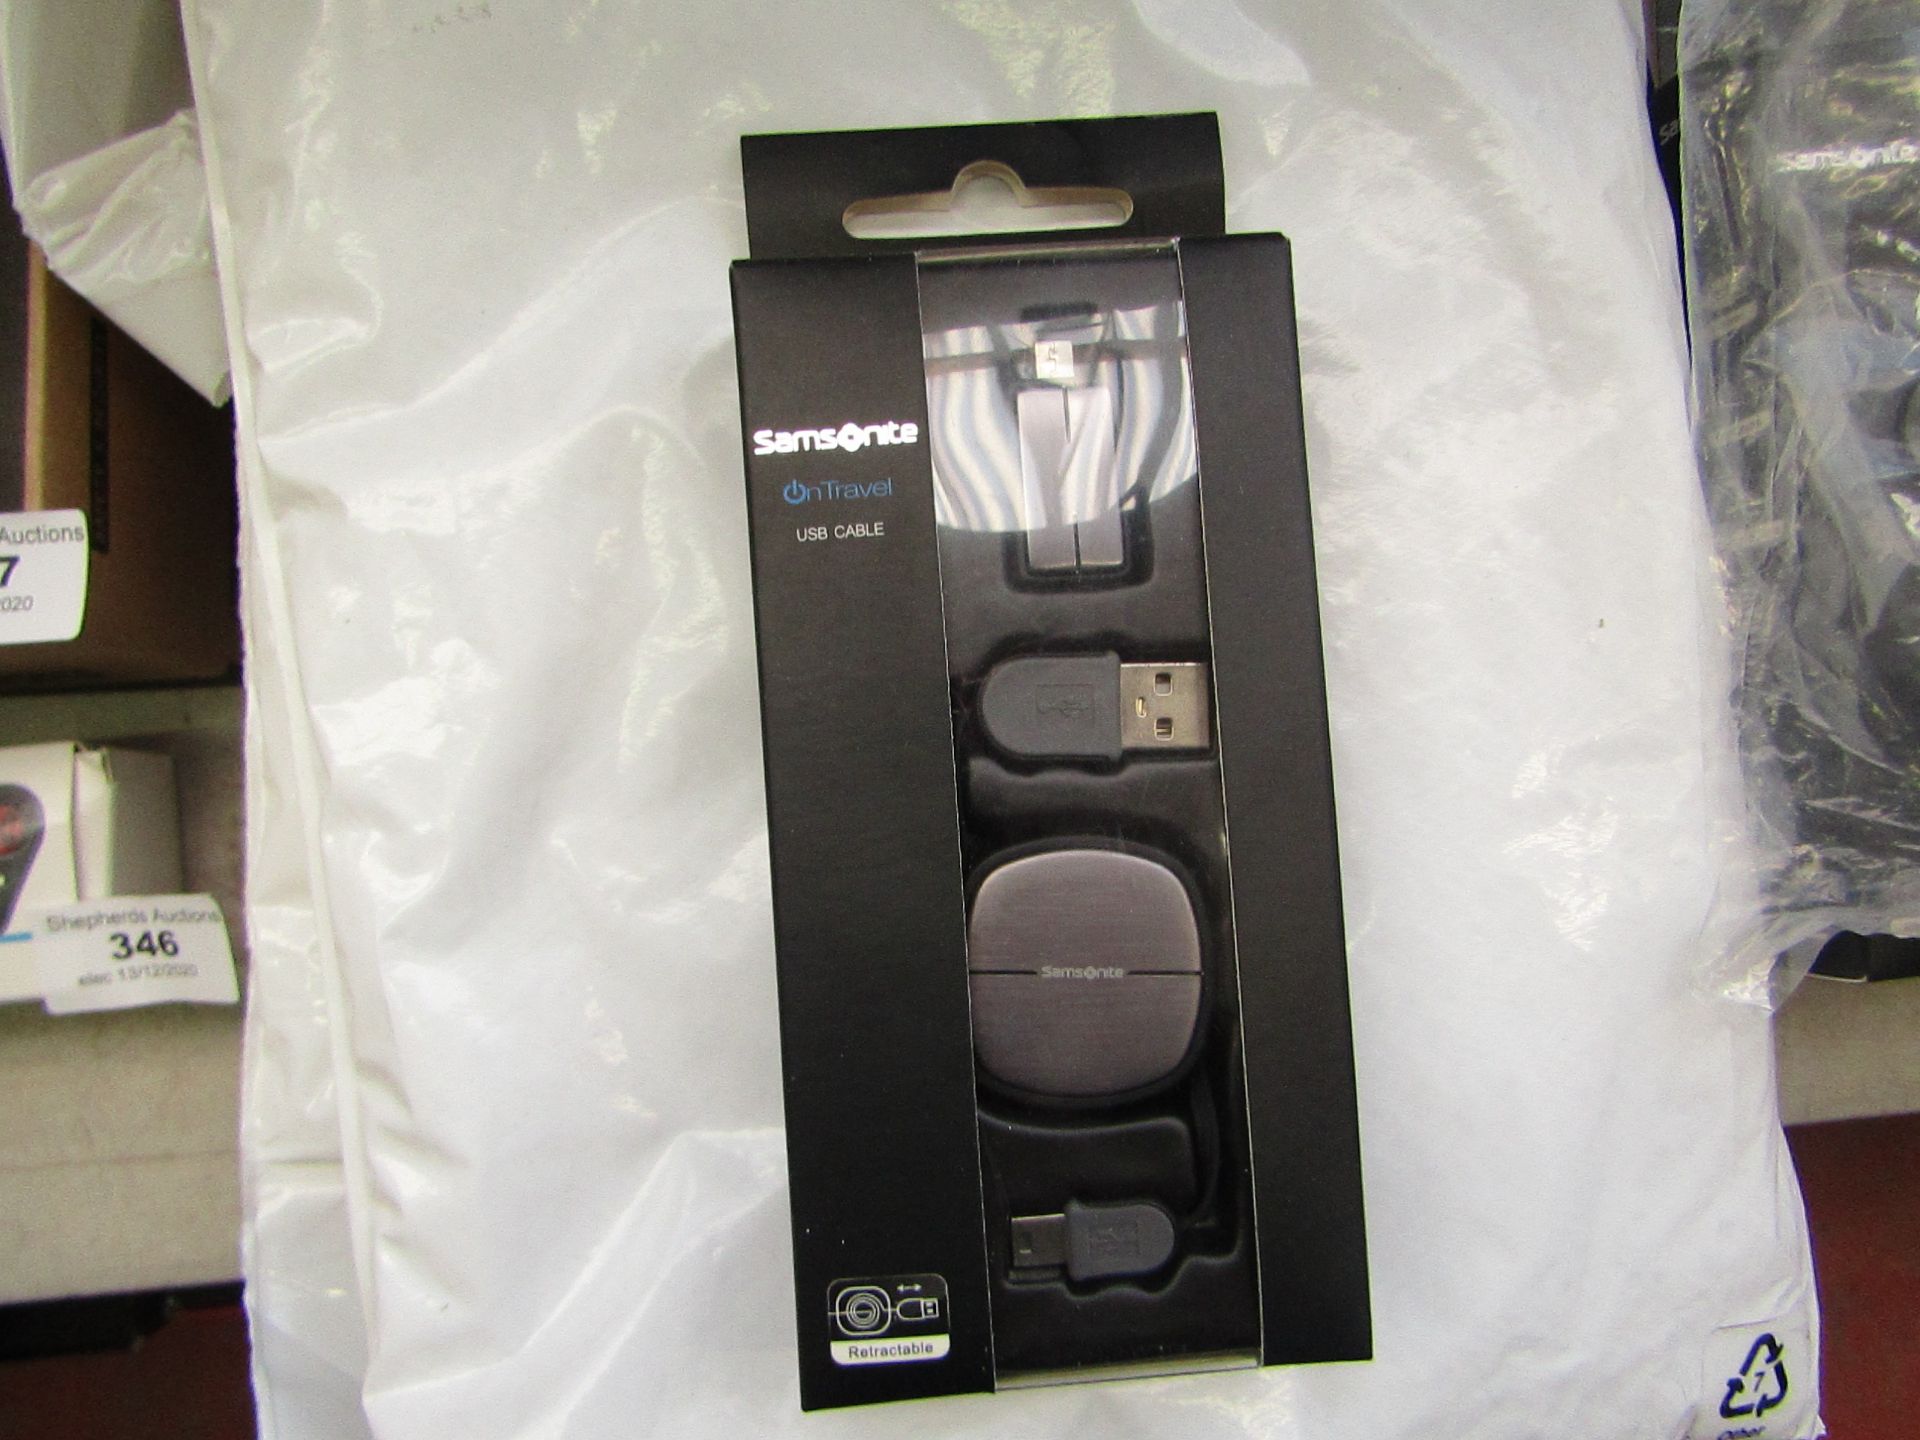 Samsonite On Travel USB cable, new and boxed.